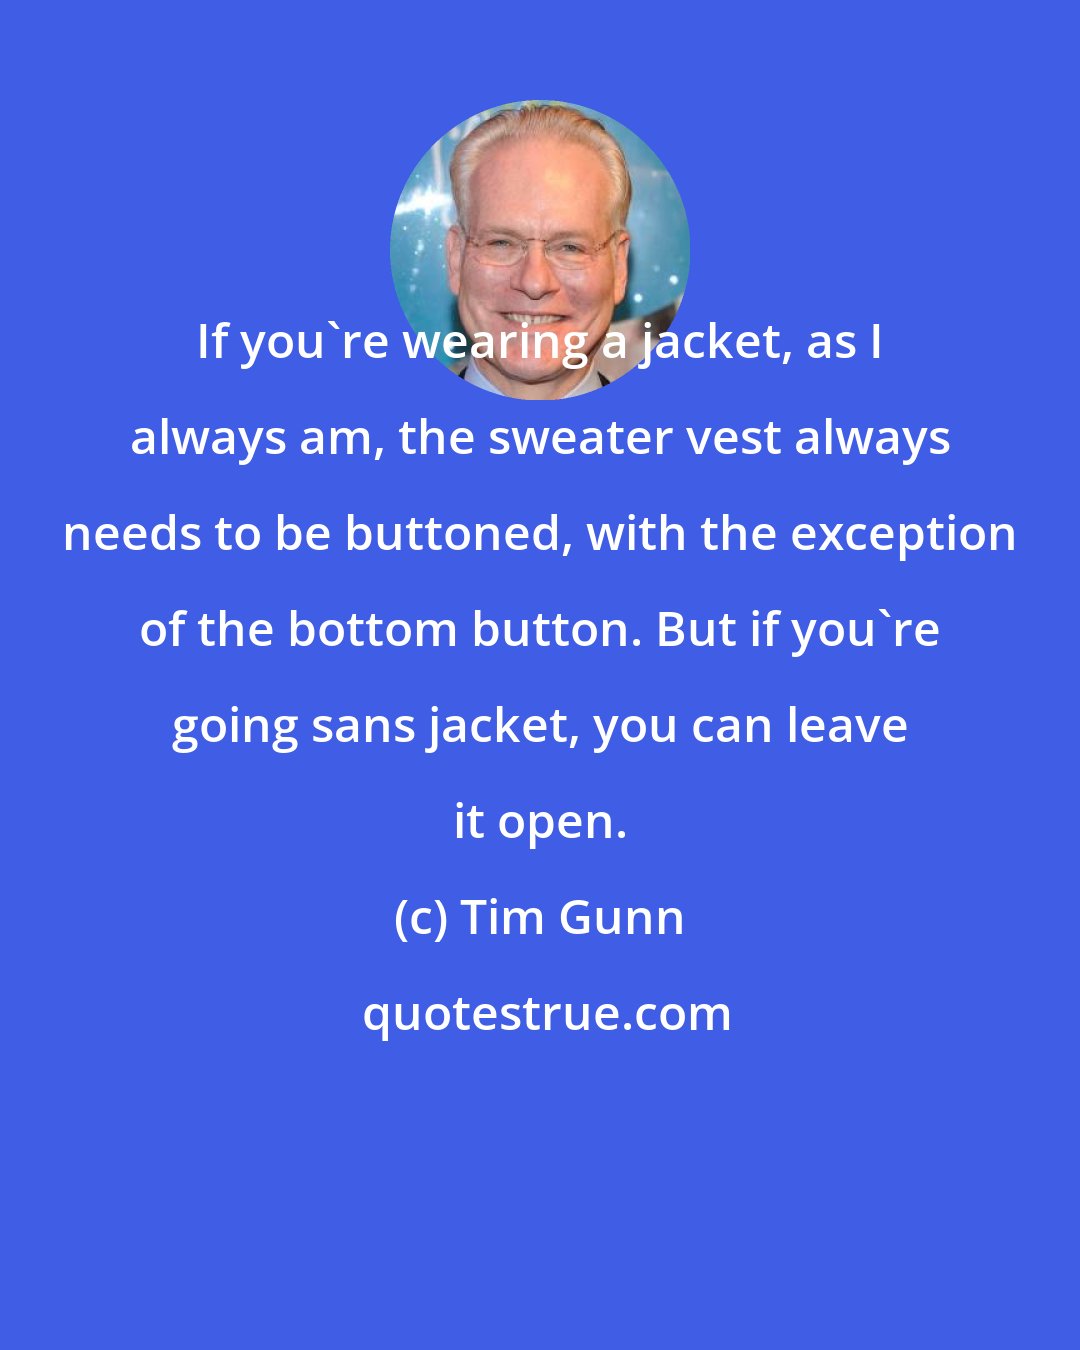 Tim Gunn: If you're wearing a jacket, as I always am, the sweater vest always needs to be buttoned, with the exception of the bottom button. But if you're going sans jacket, you can leave it open.